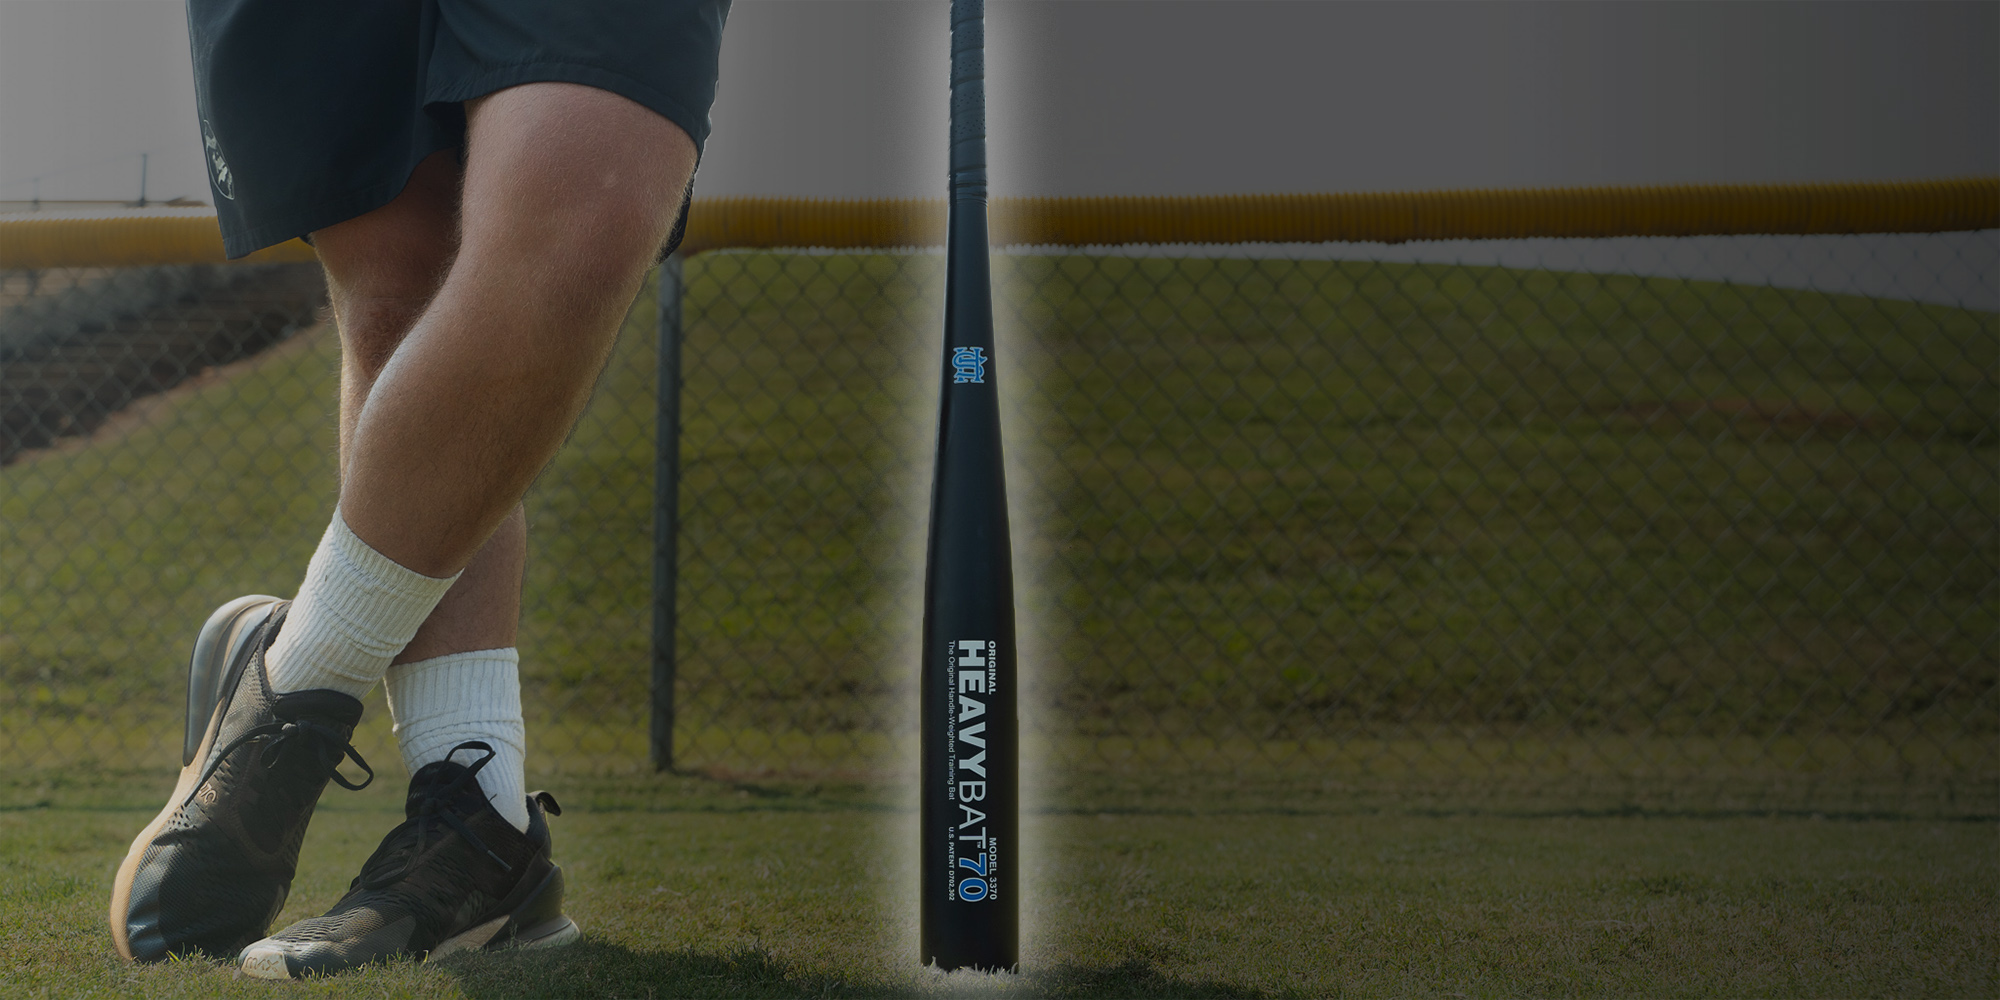 Weighted Bats for Strength Training